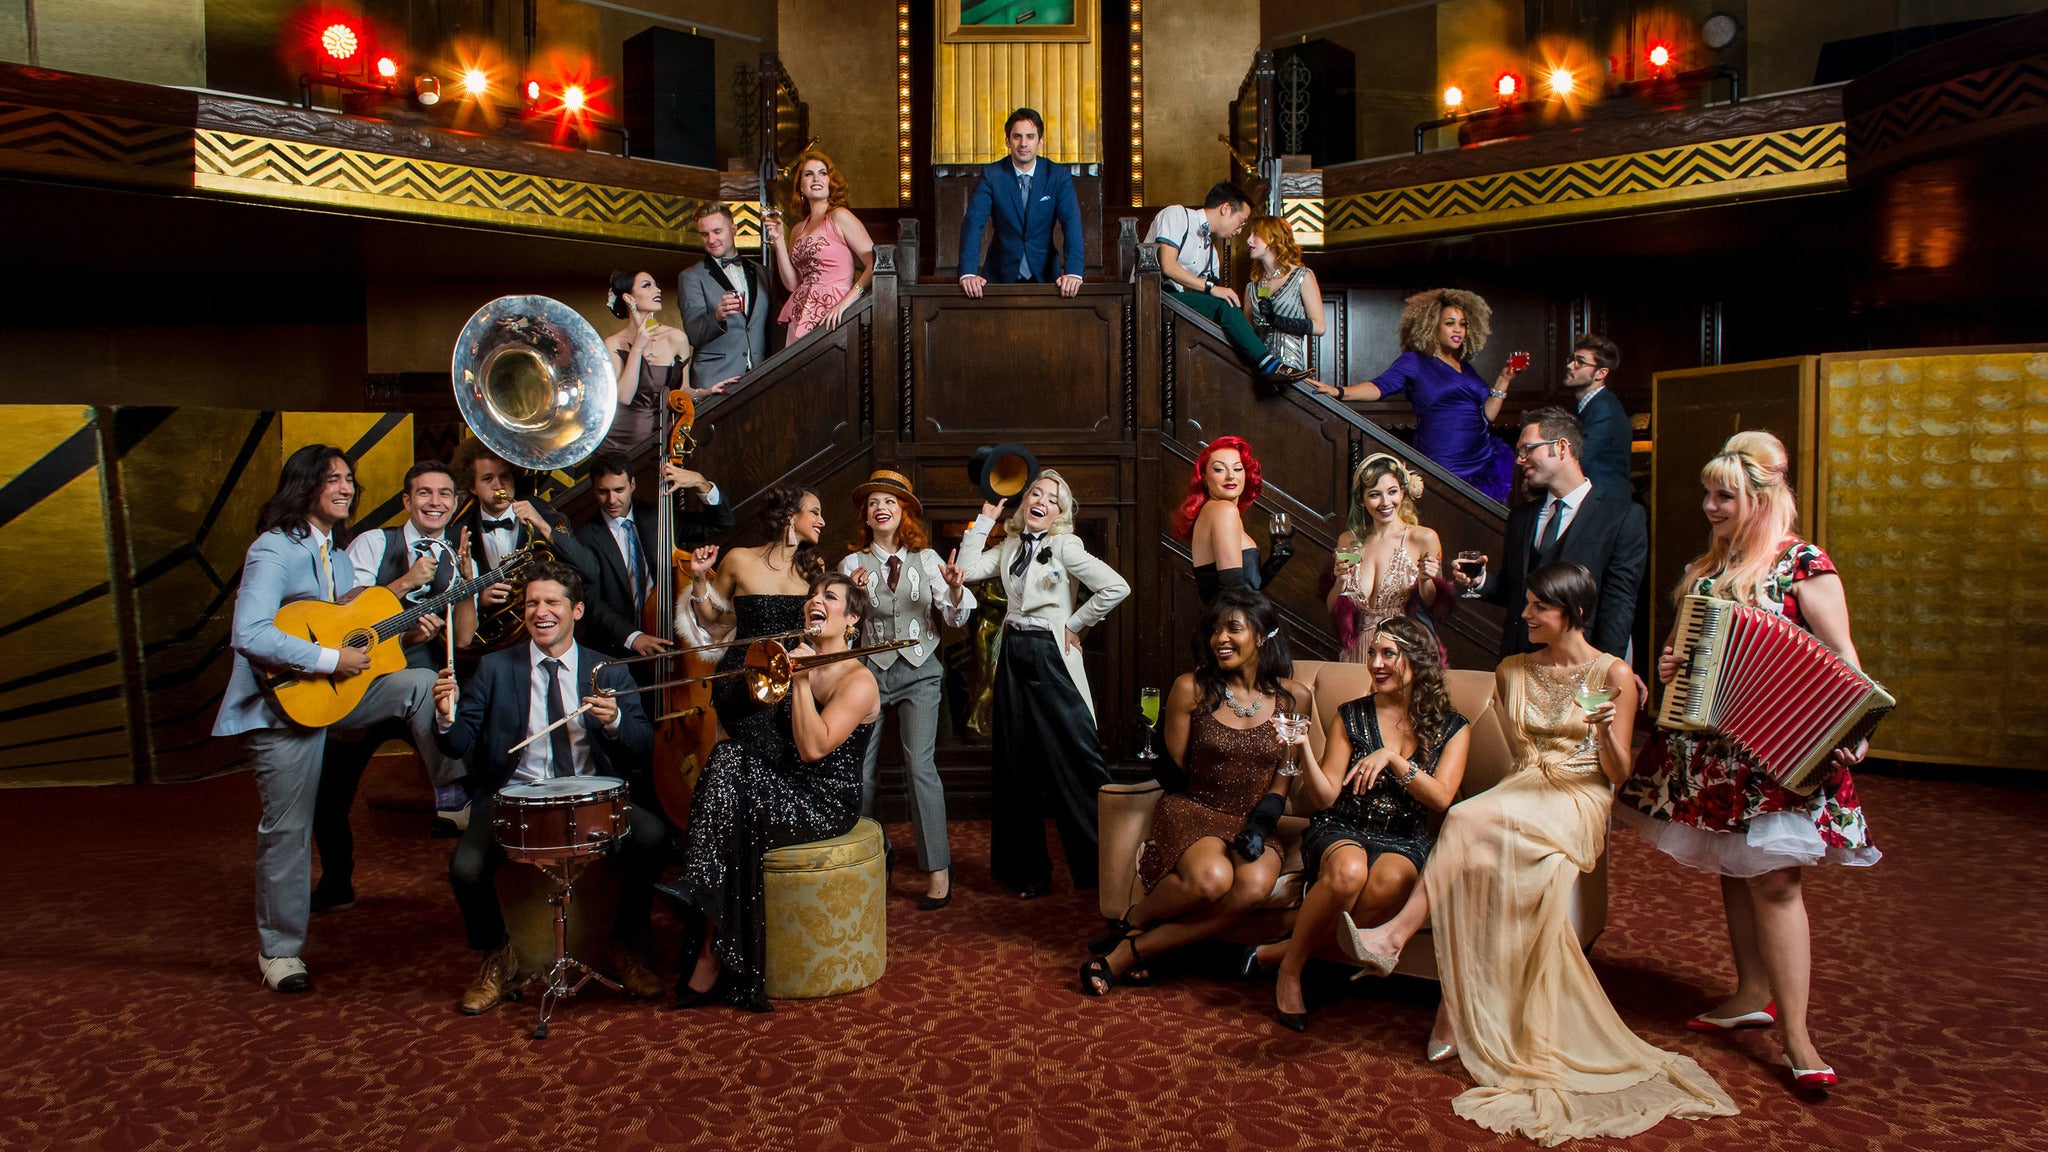 Image used with permission from Ticketmaster | Postmodern Jukebox VIP Packages tickets